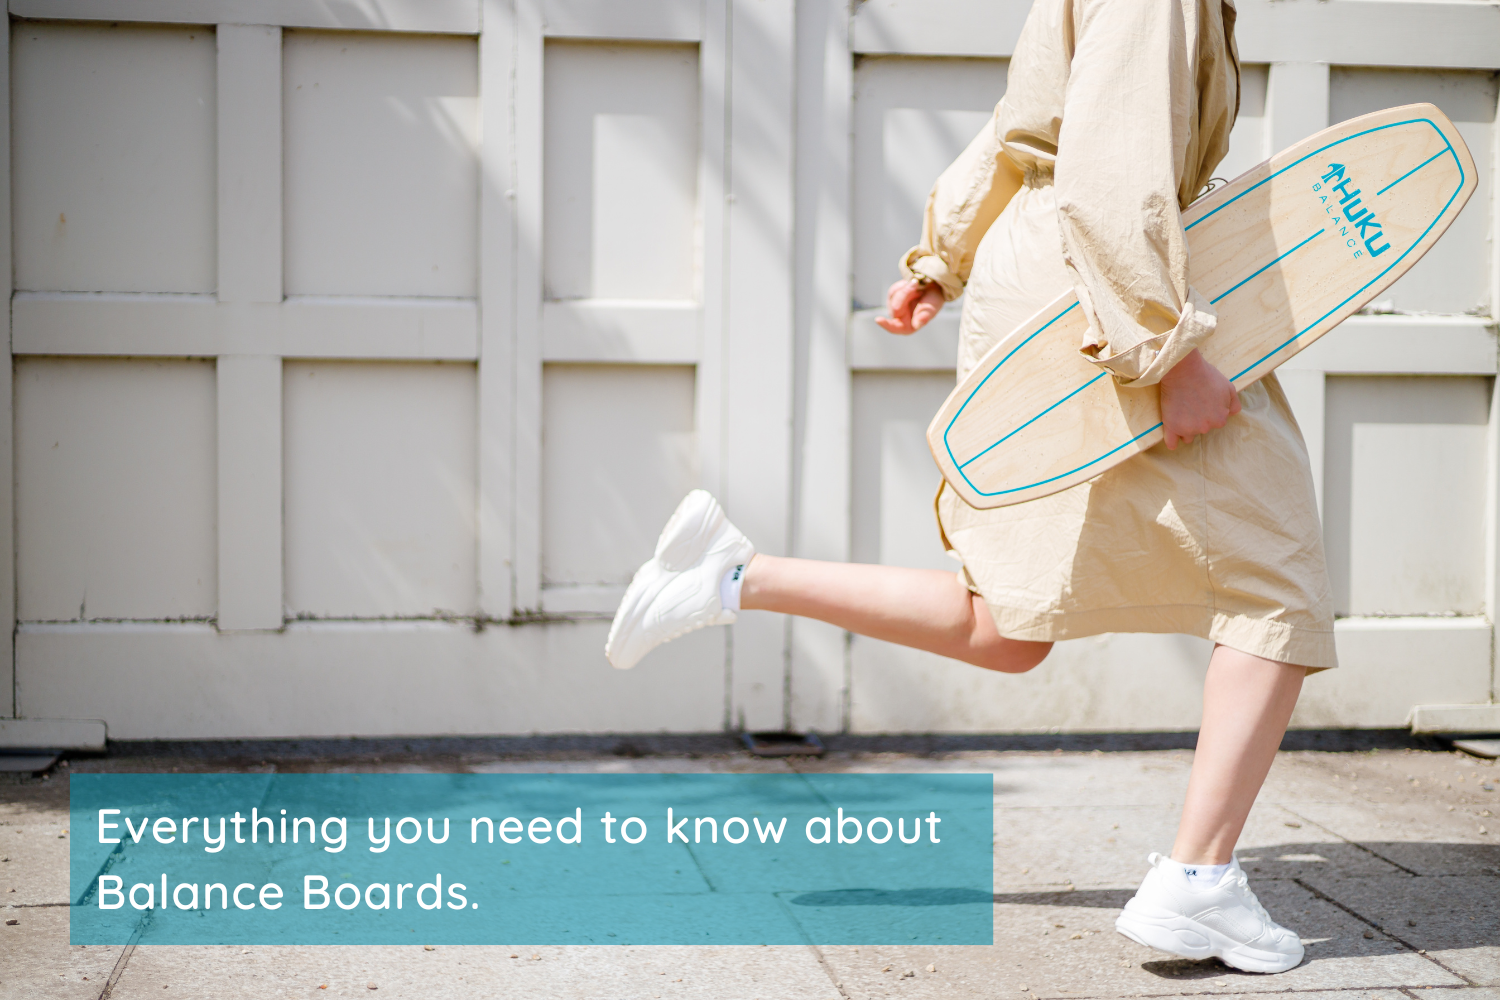 Everything you need to know about Balance Boards